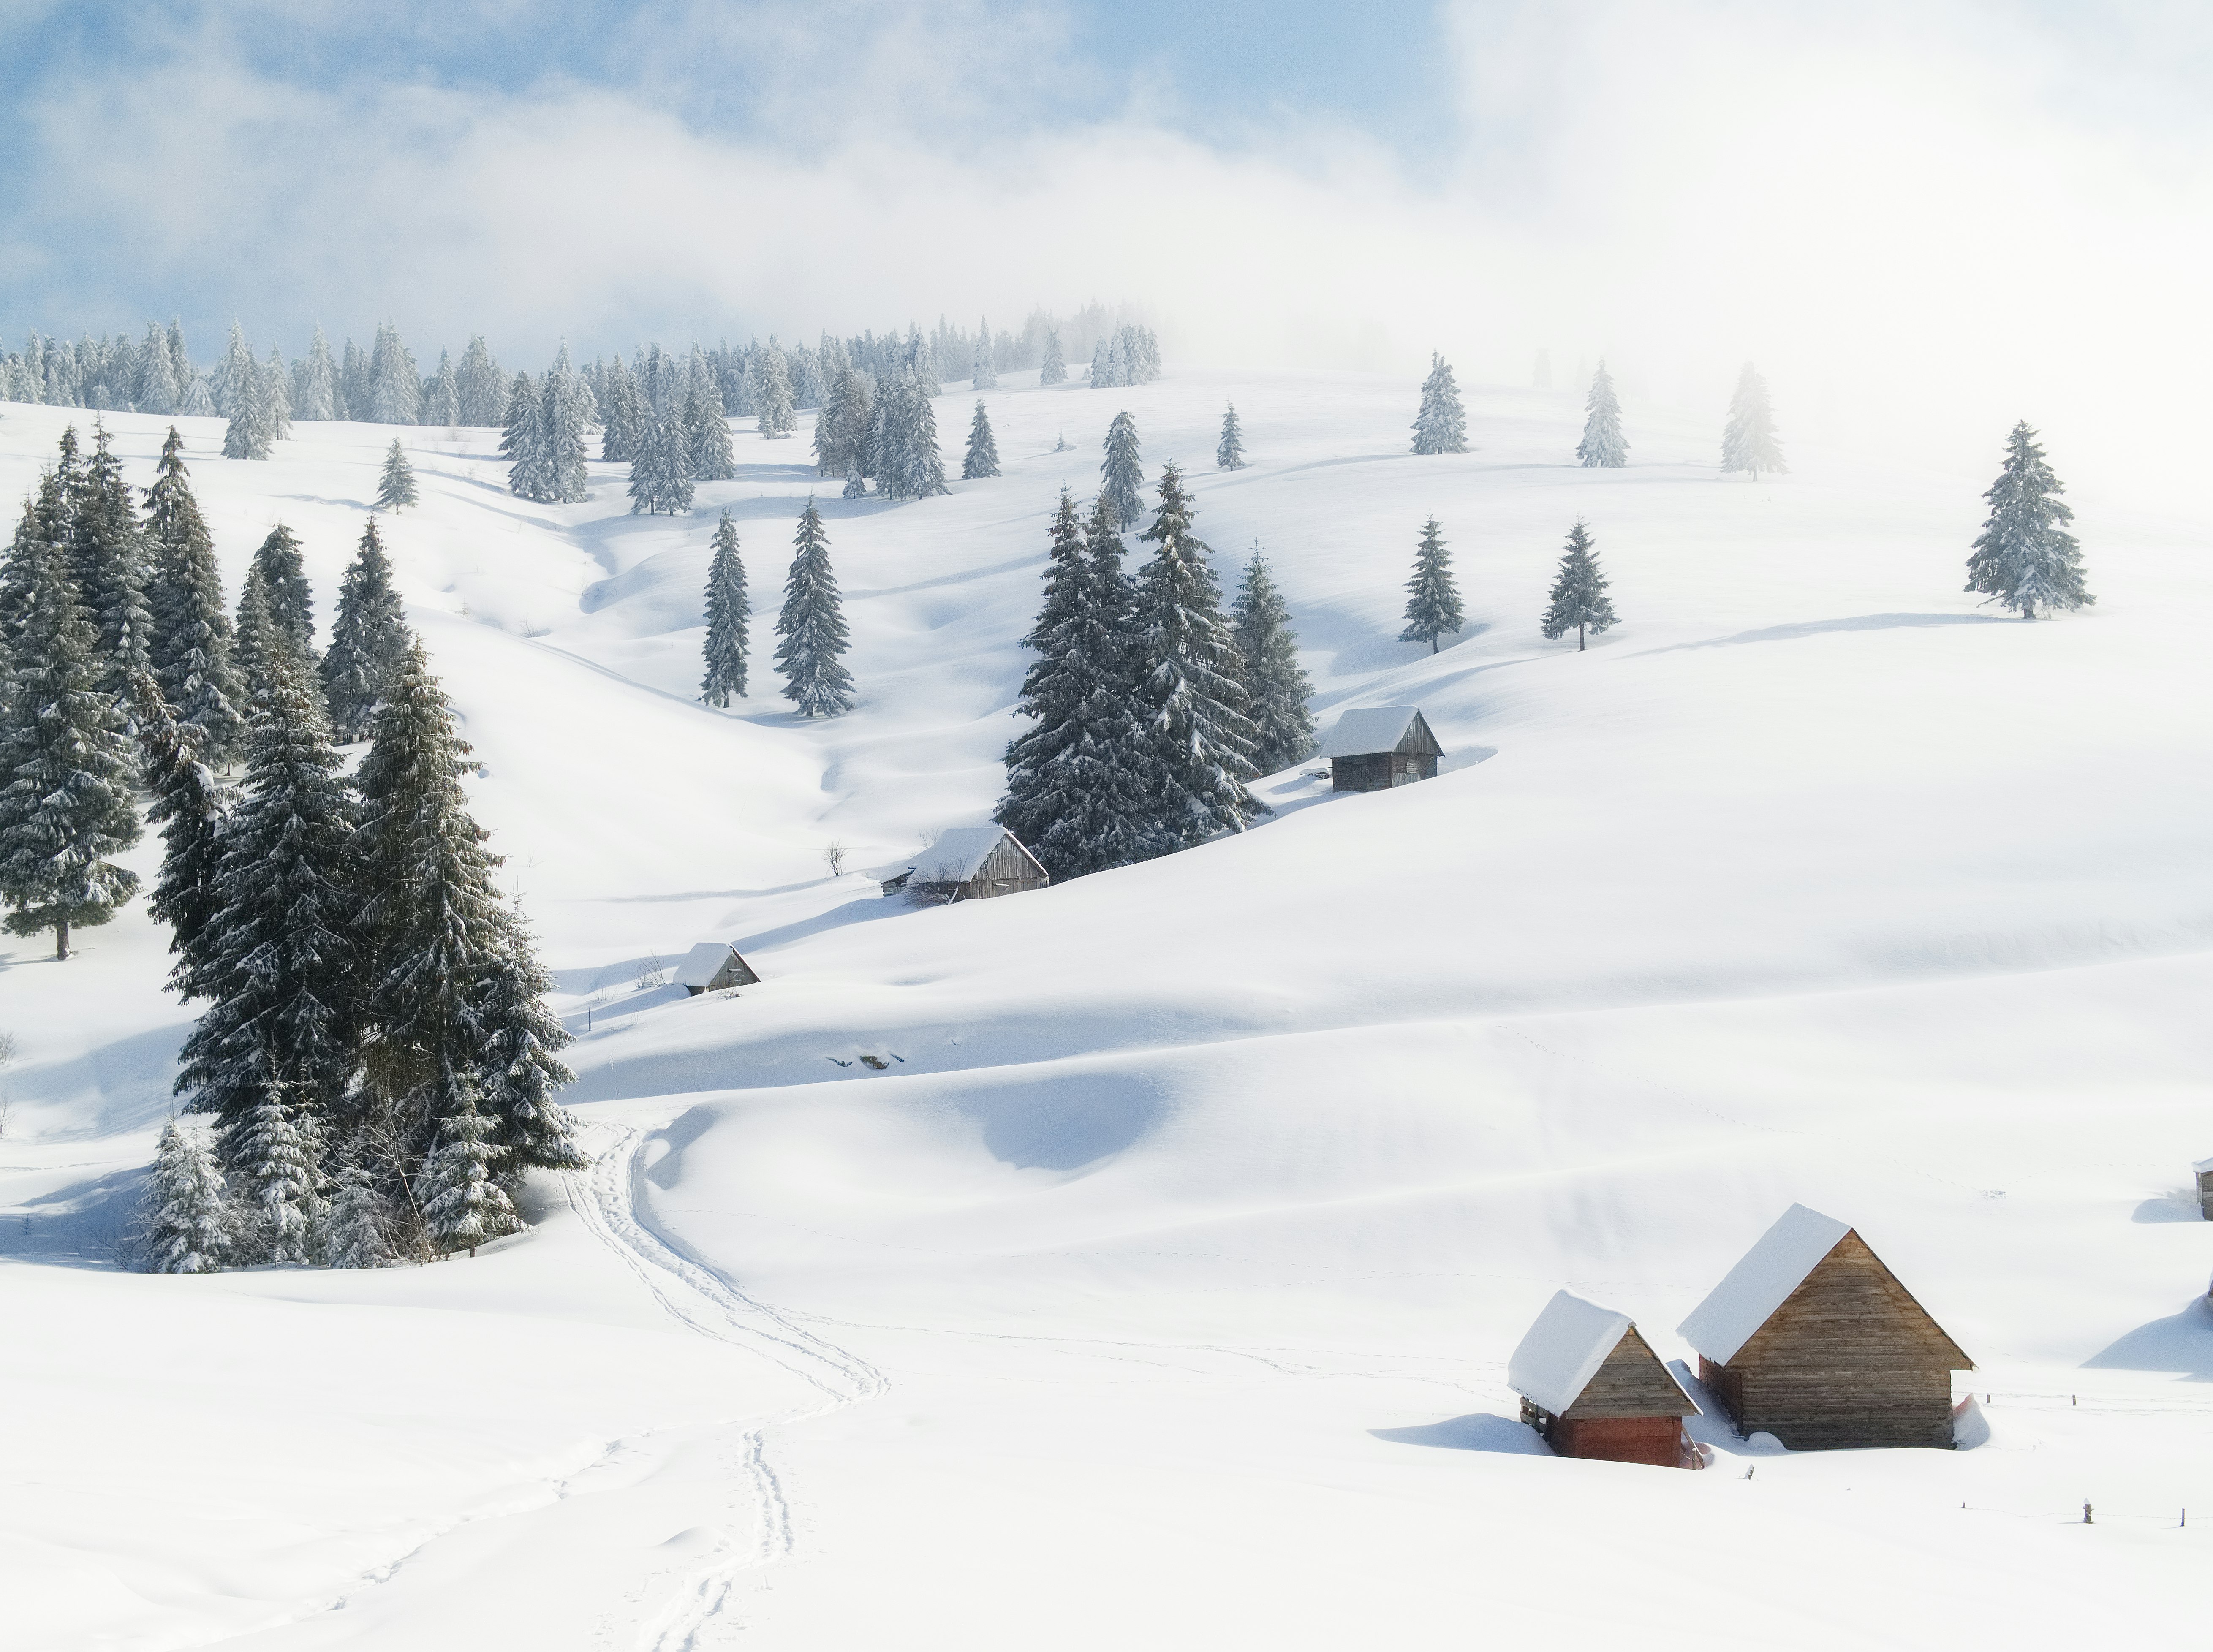 brown wooden house on snow covered ground during daytime